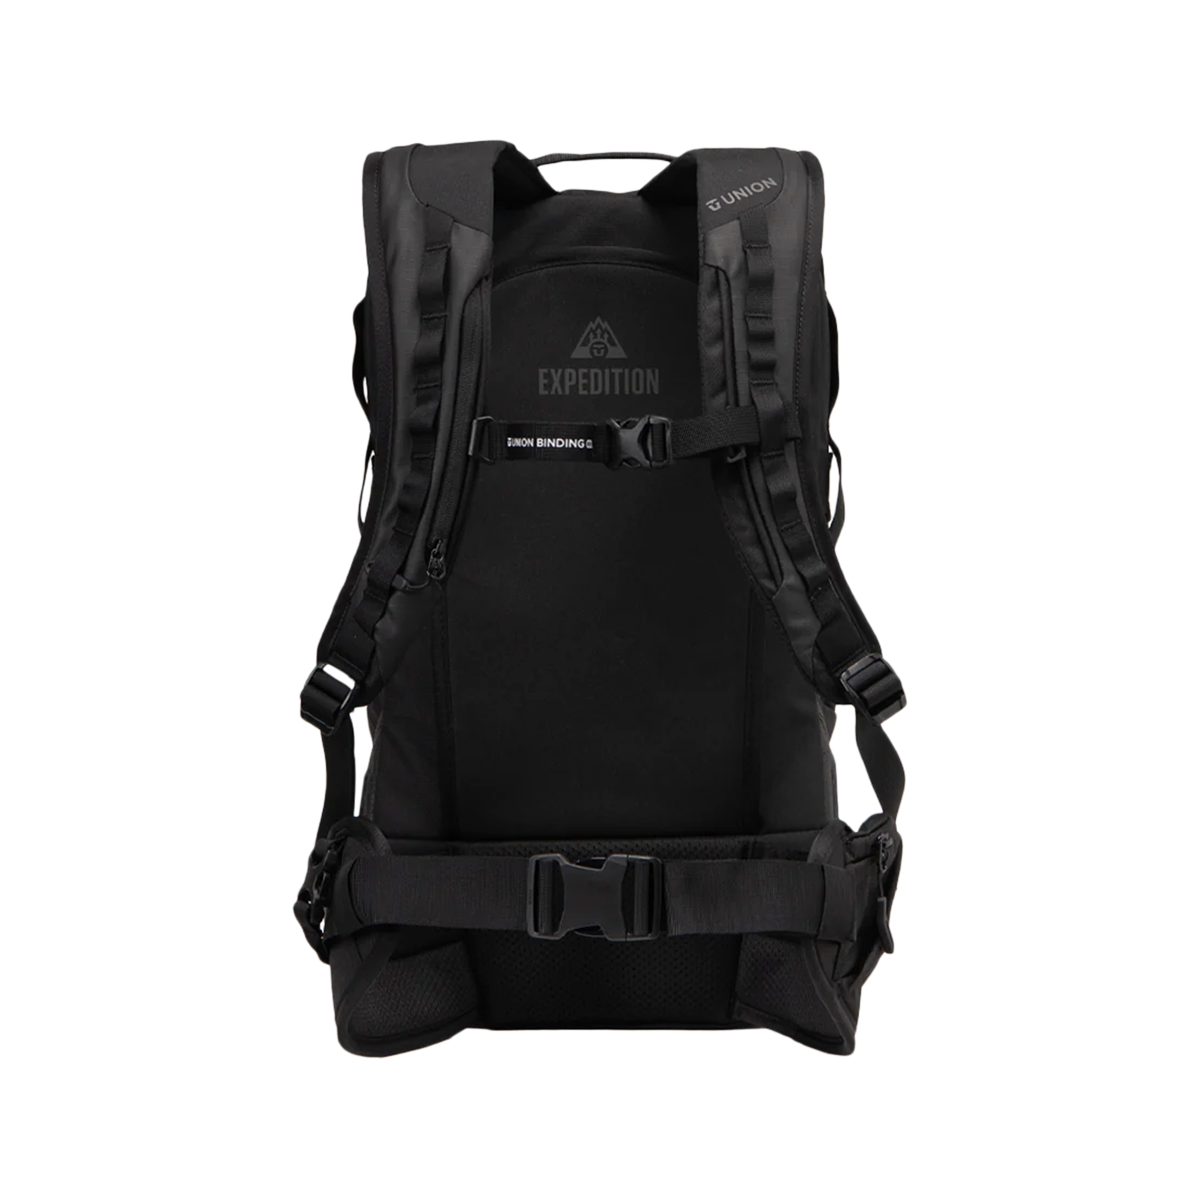 Union Expedition Backpack 24L - Black